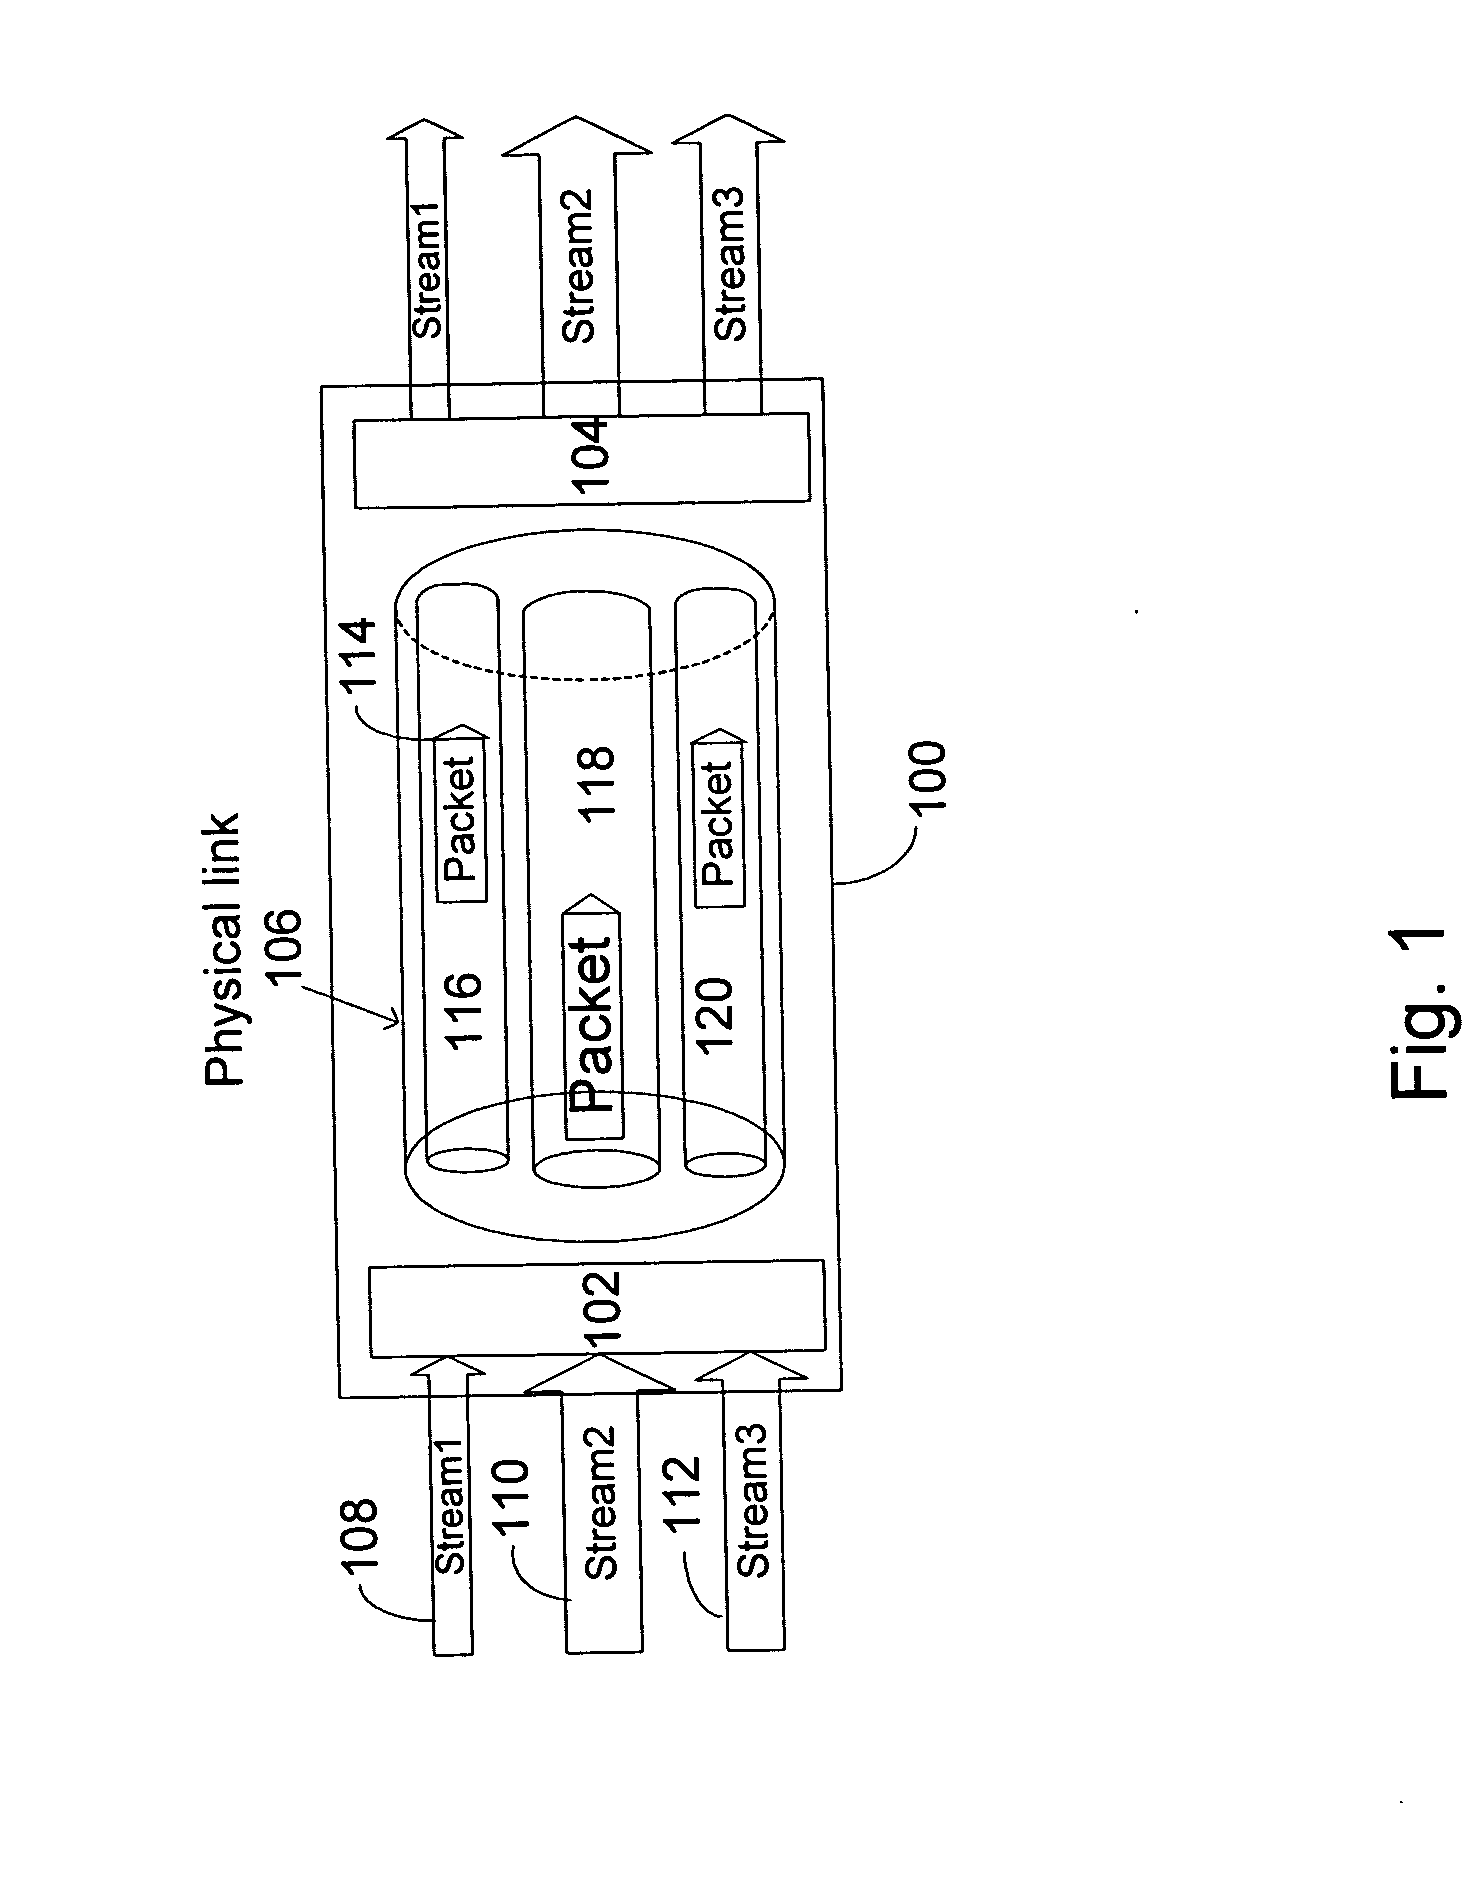 Packet based stream transport scheduler and methods of use thereof